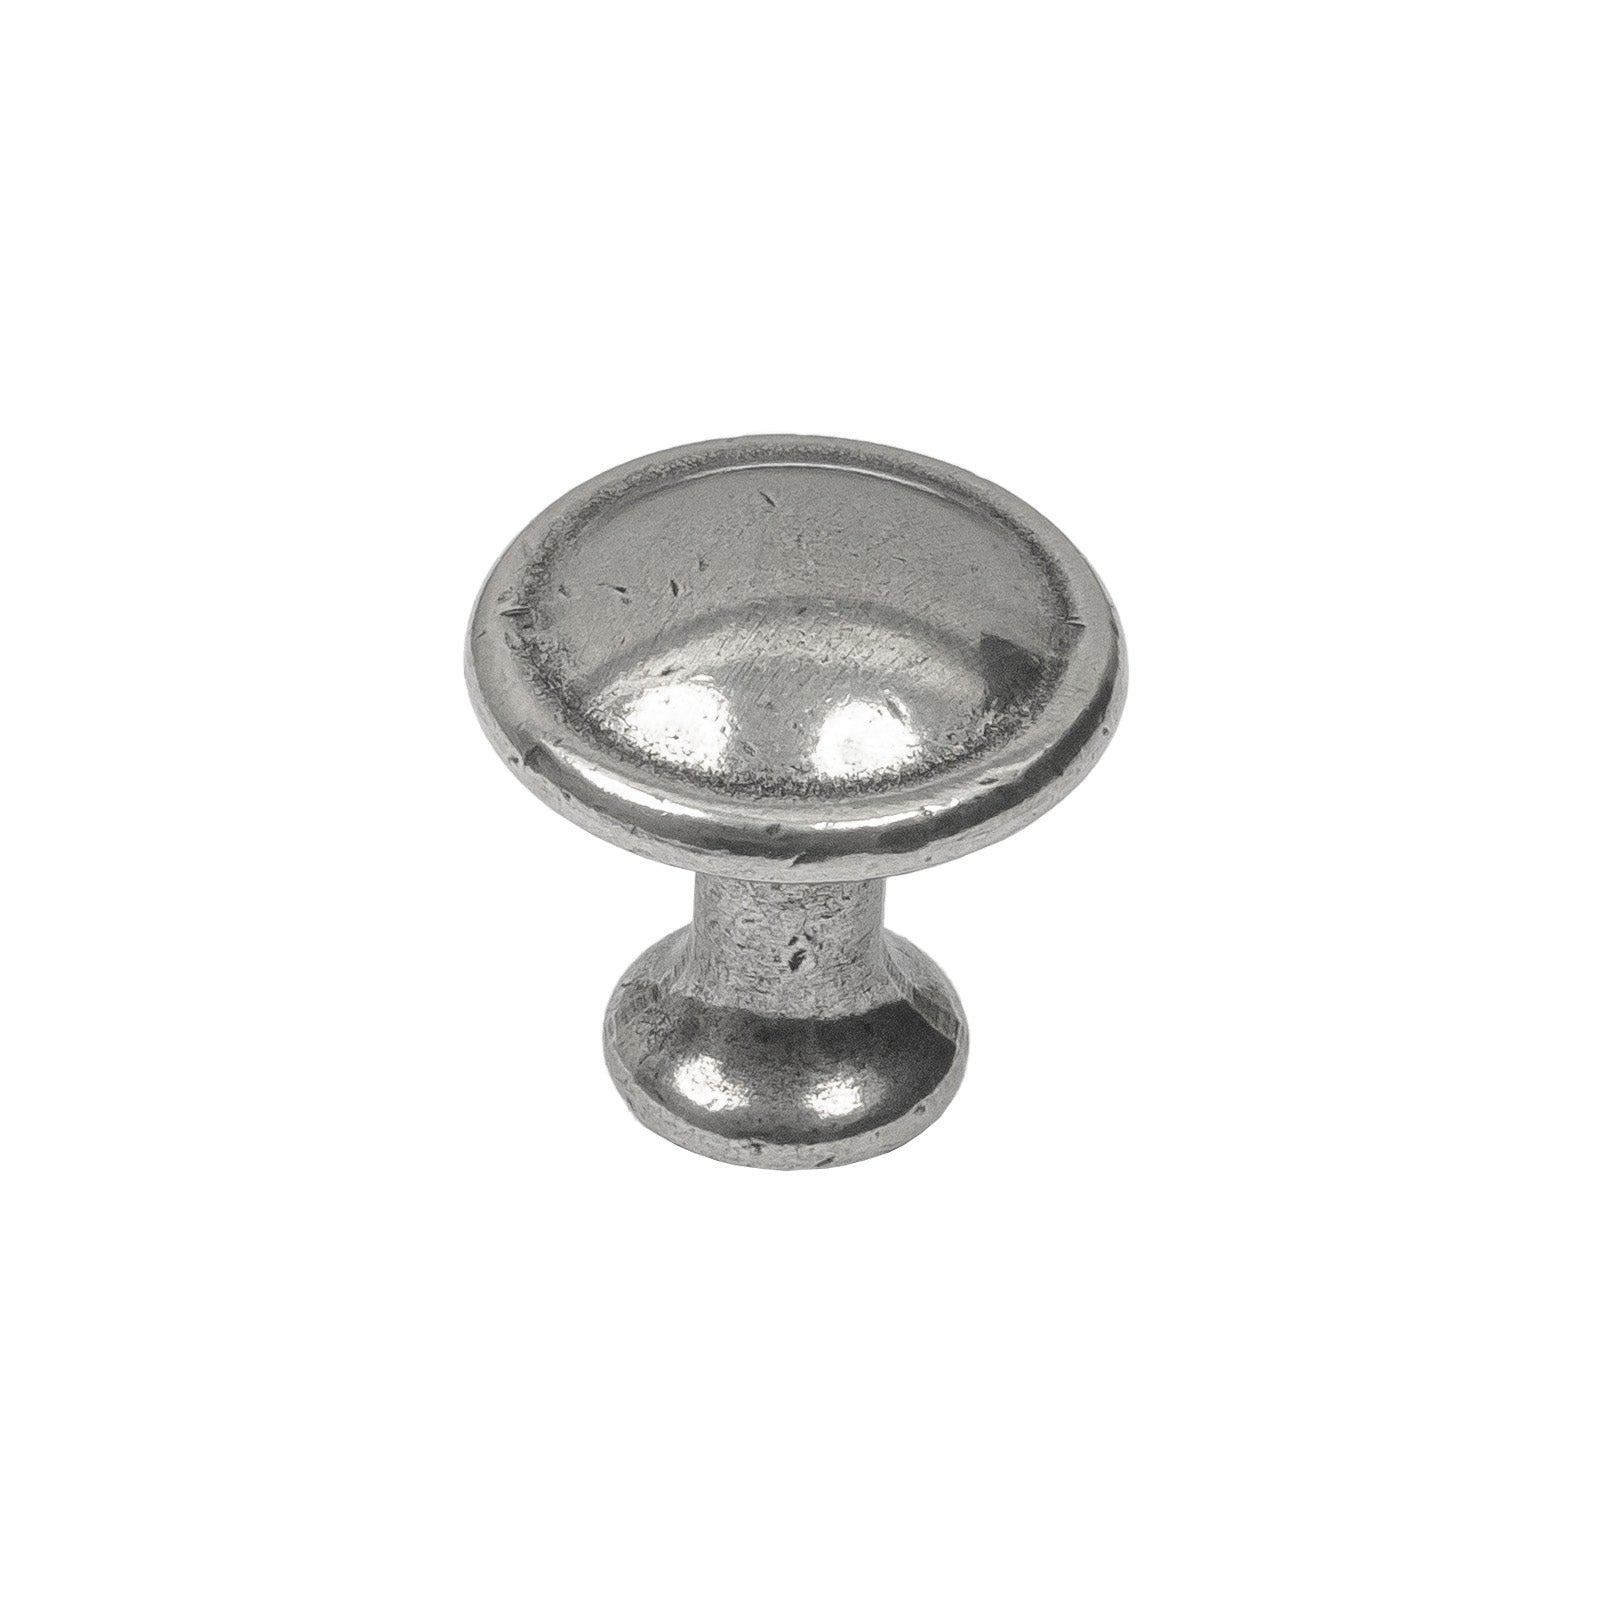 Made in UK, Finesse Pewter cabinet knob